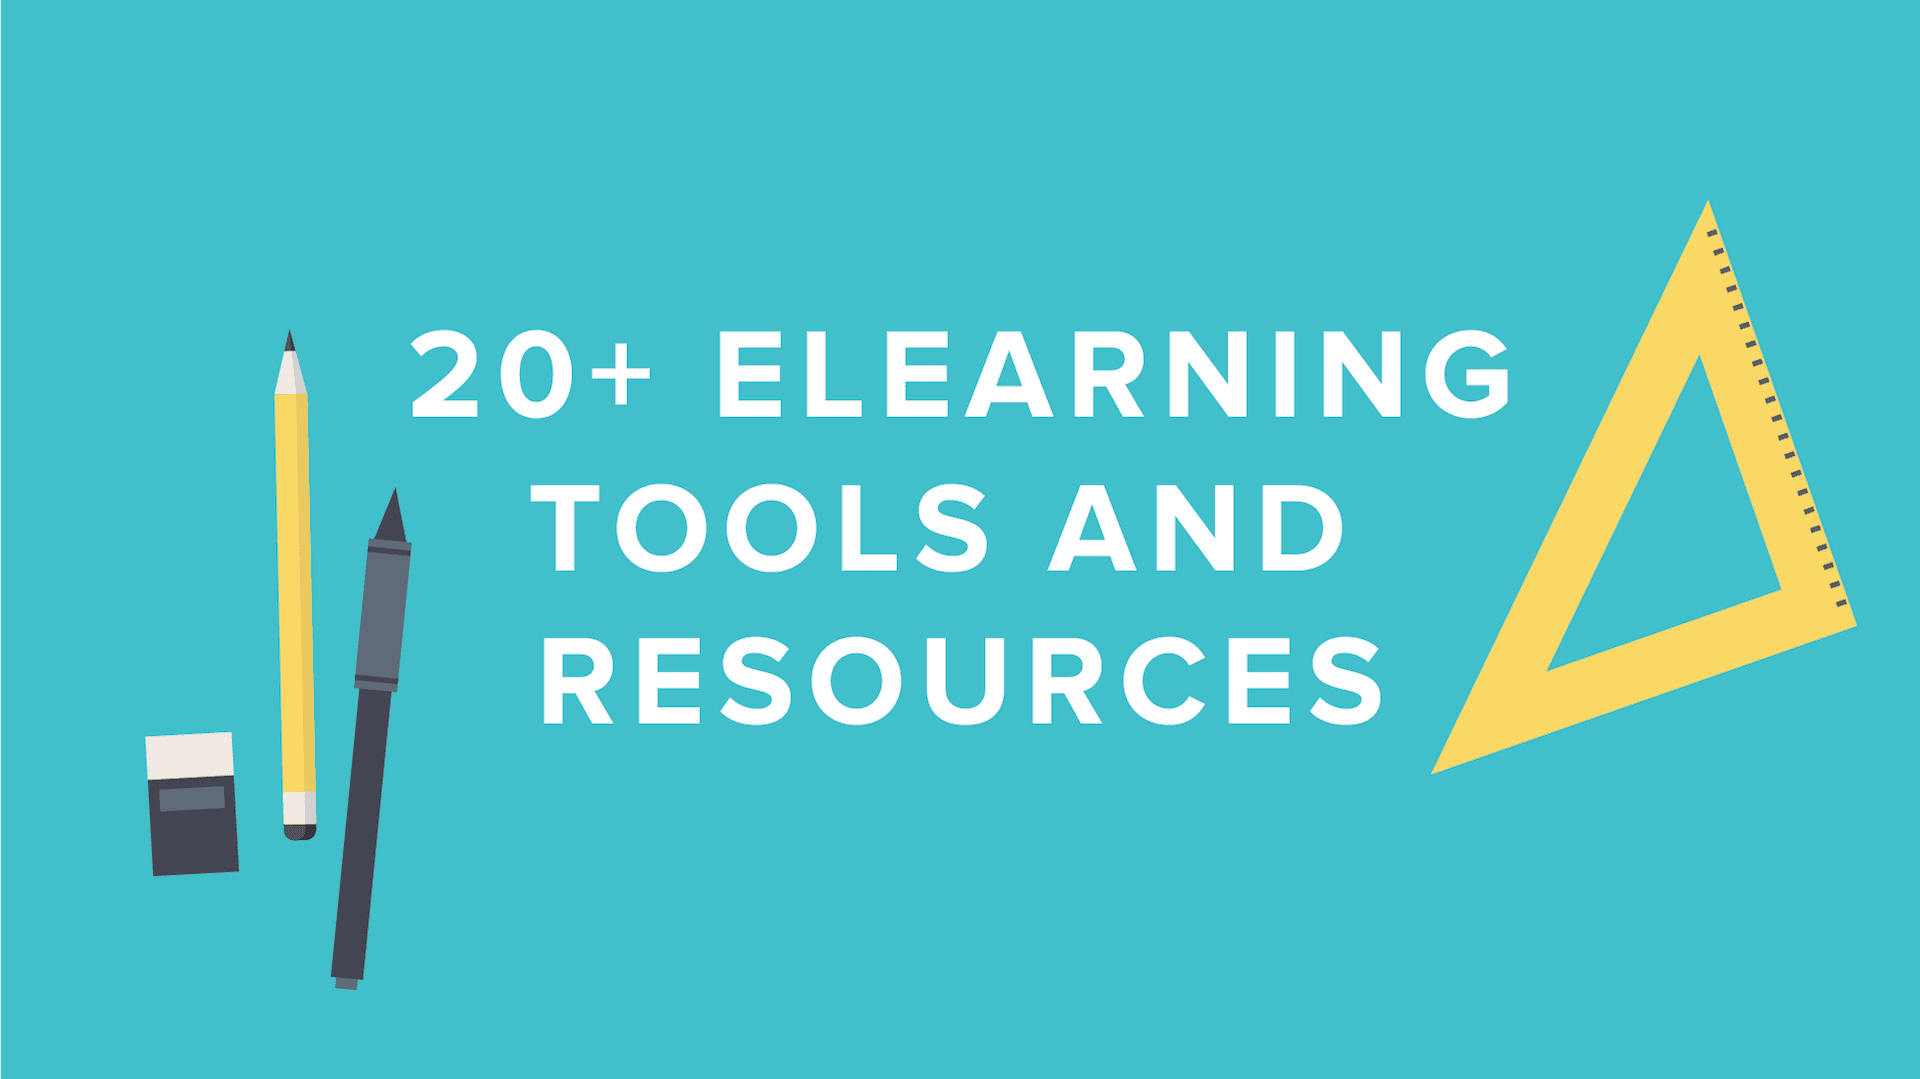 DigitalChalk: 20+ eLearning Tools and Resources